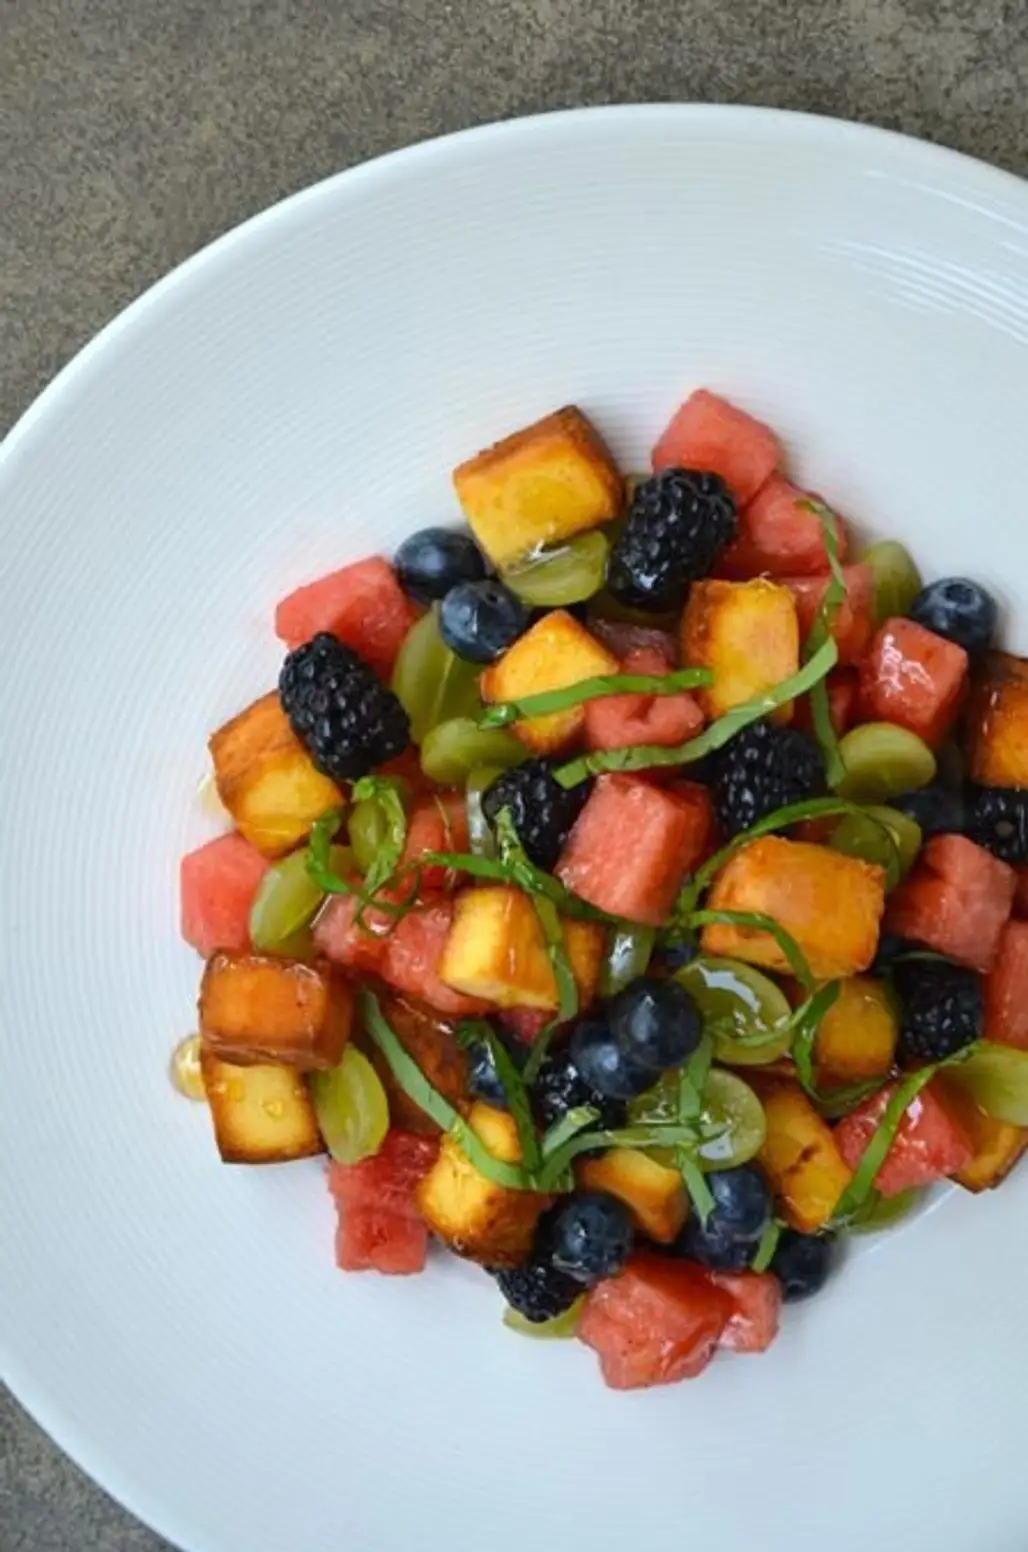 Italian Fruit Salad with Pound Cake Croutons